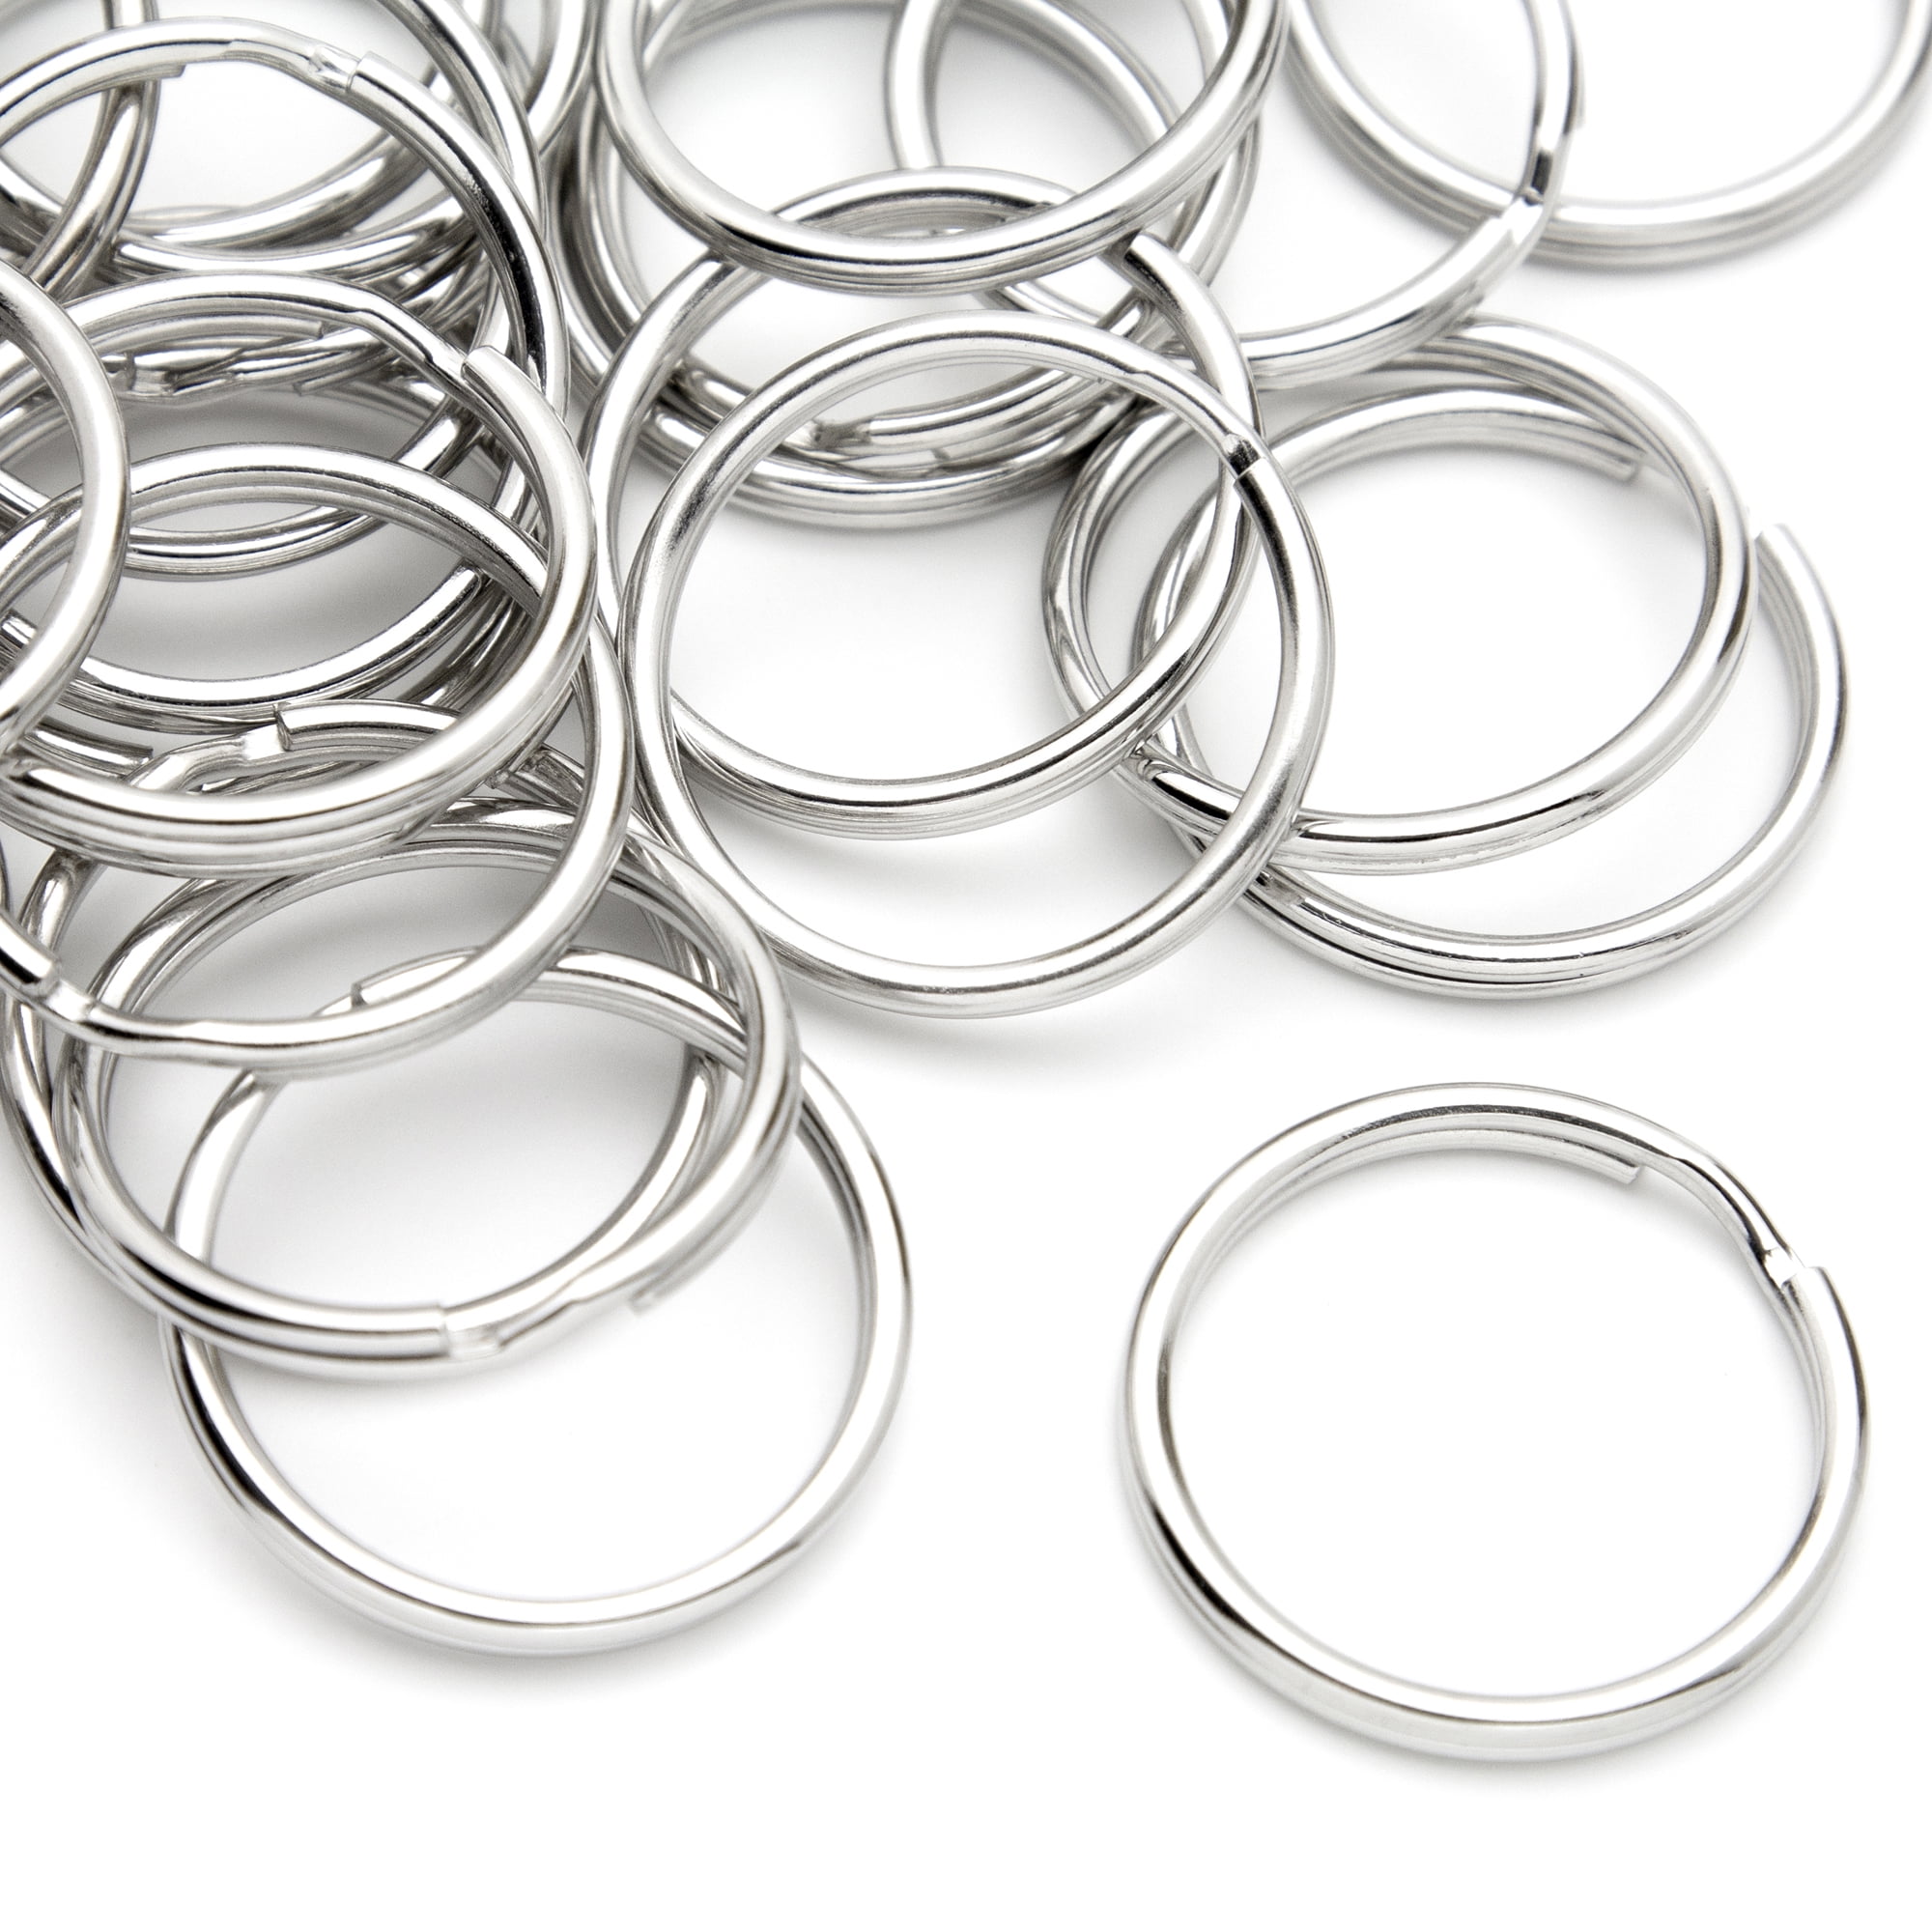 Crystal Connectors Pack of 300 FREE SHIPPING USA Silver Tone Split Rings 12mm Chandelier Pins